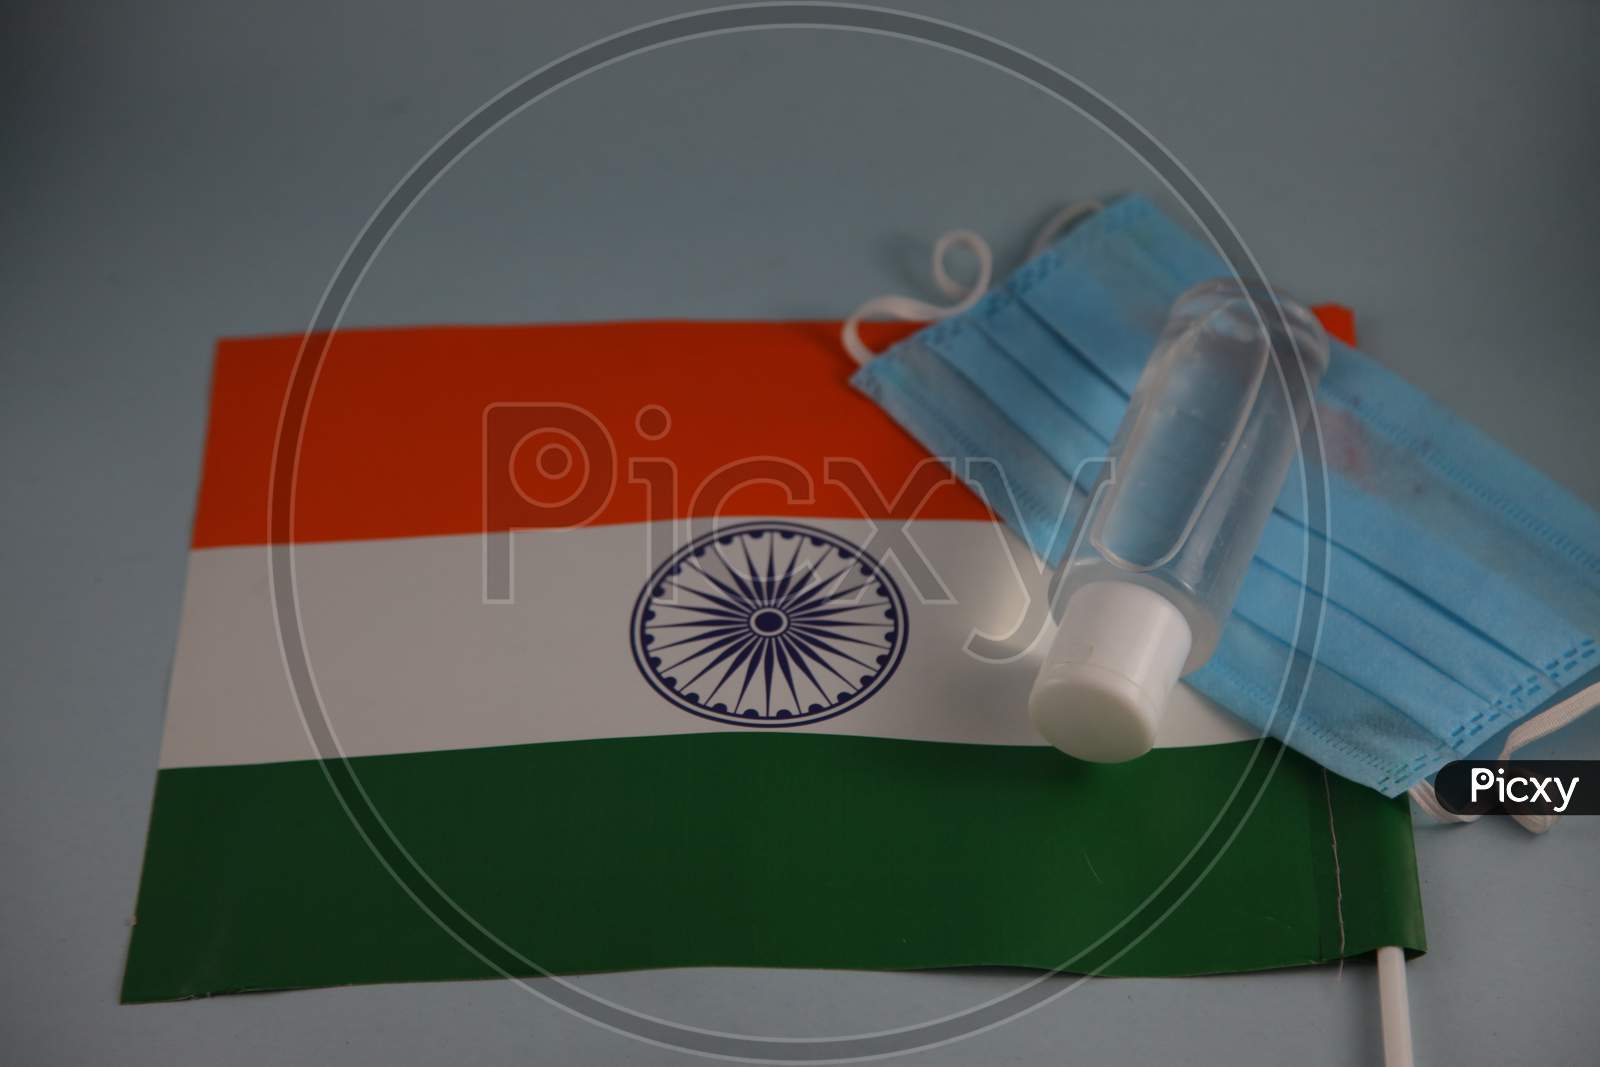 India celebrate Independence day with Mark and sanitizer